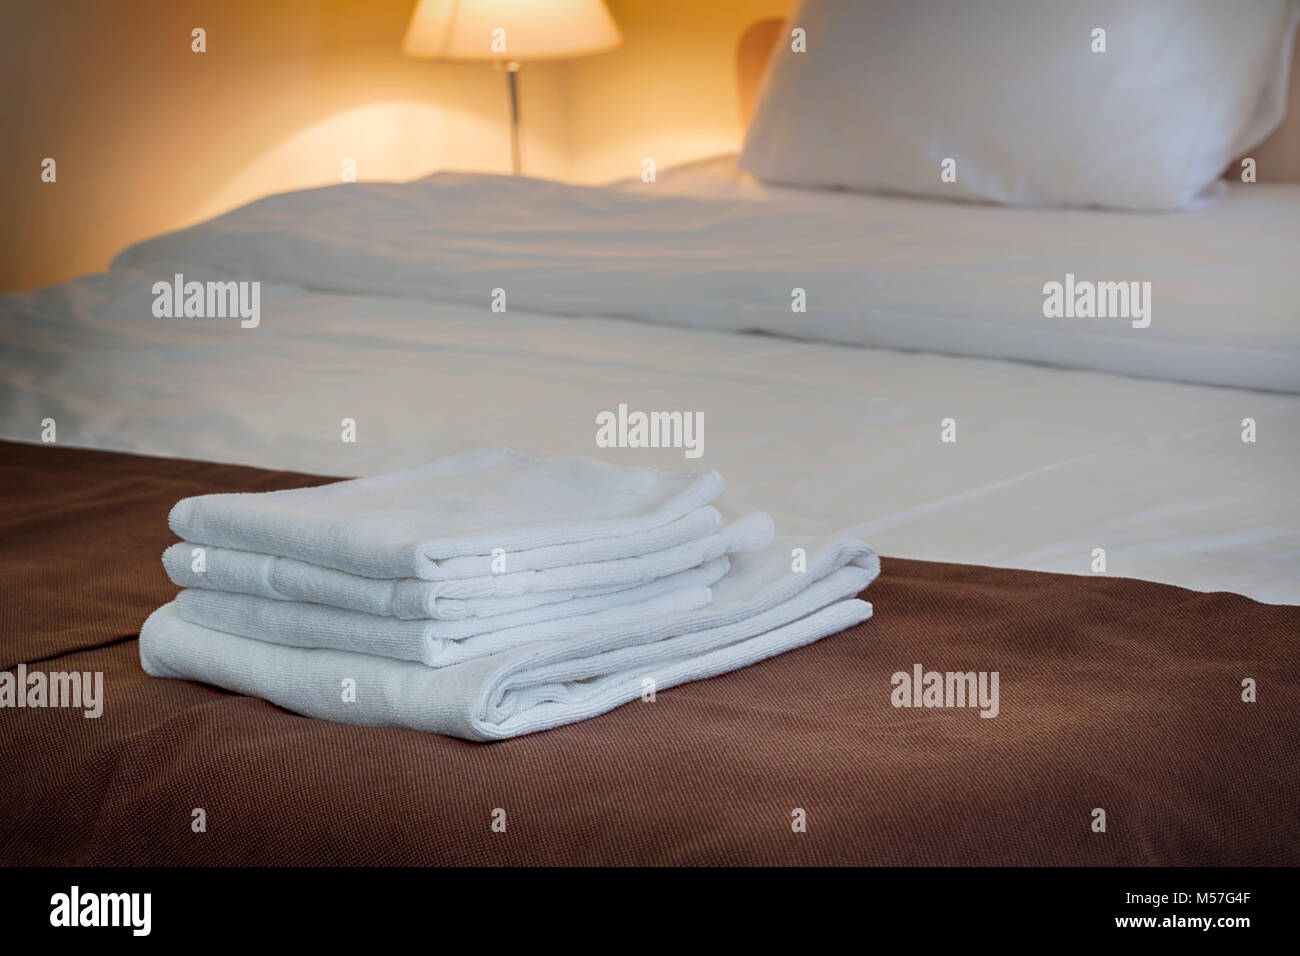 Fluffy white towels on table Stock Photo by ©Sandralise 3390190